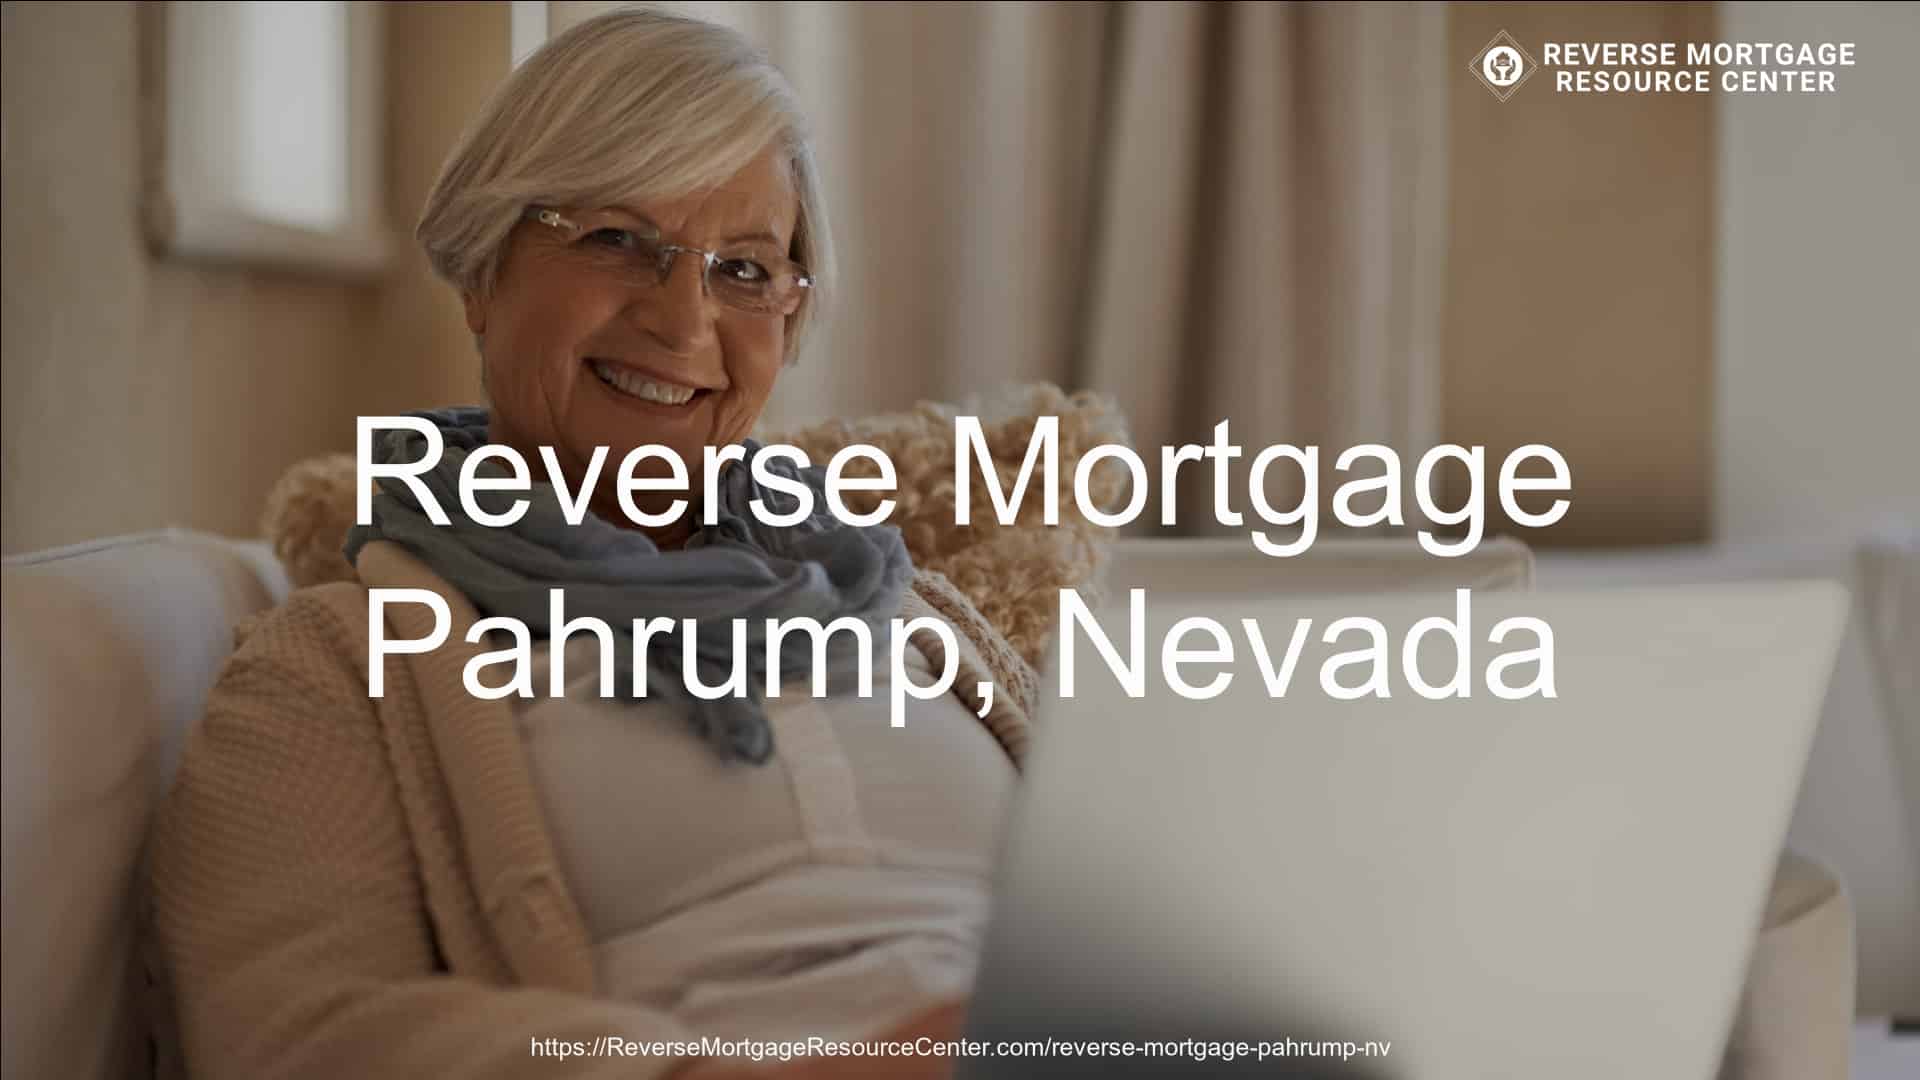 Reverse Mortgage Loans in Pahrump Nevada